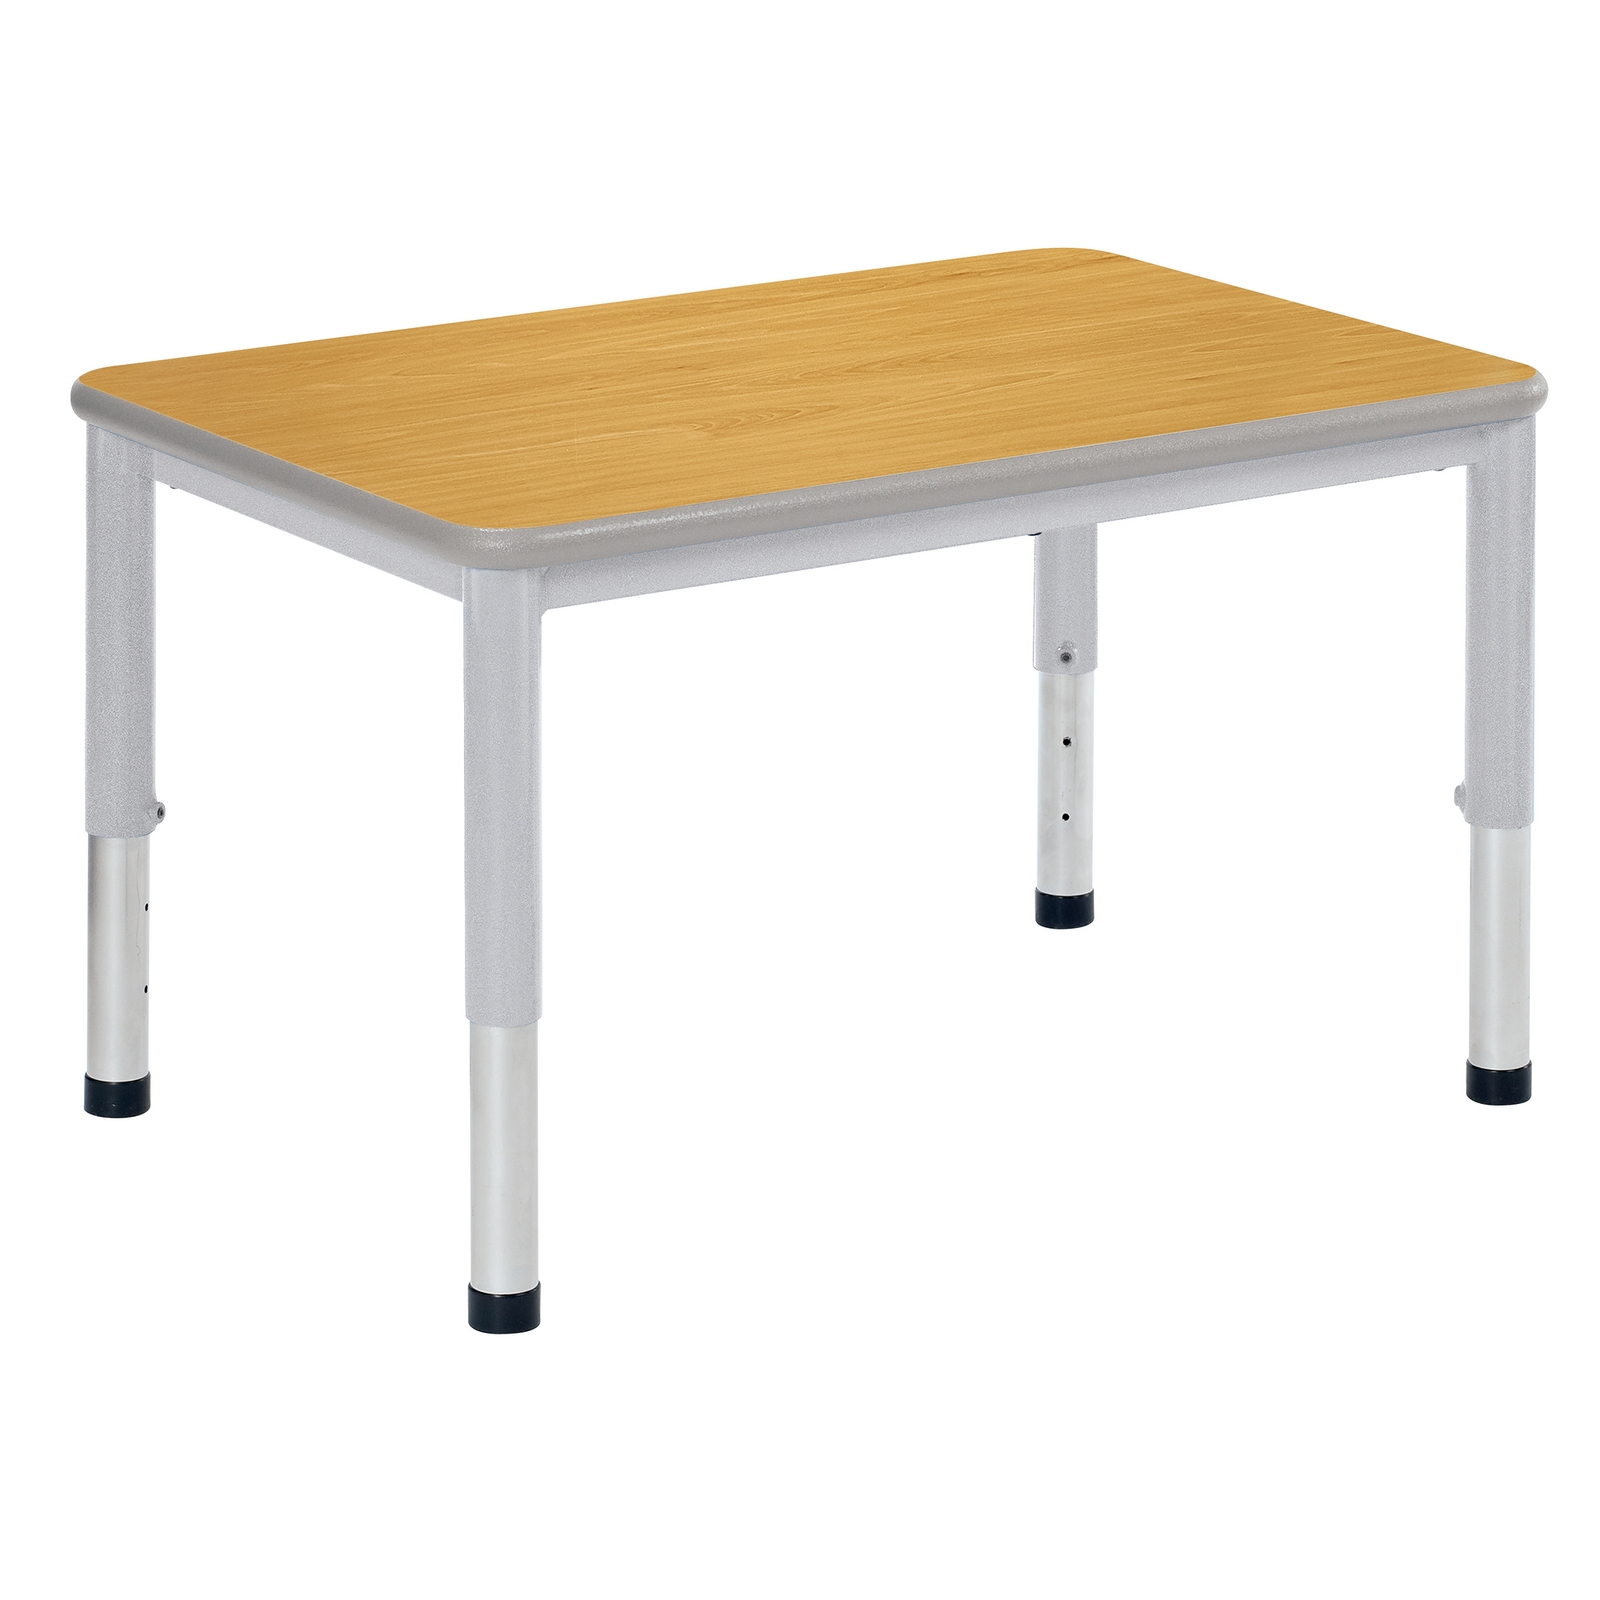 Harlequin Small Rect Table Beech